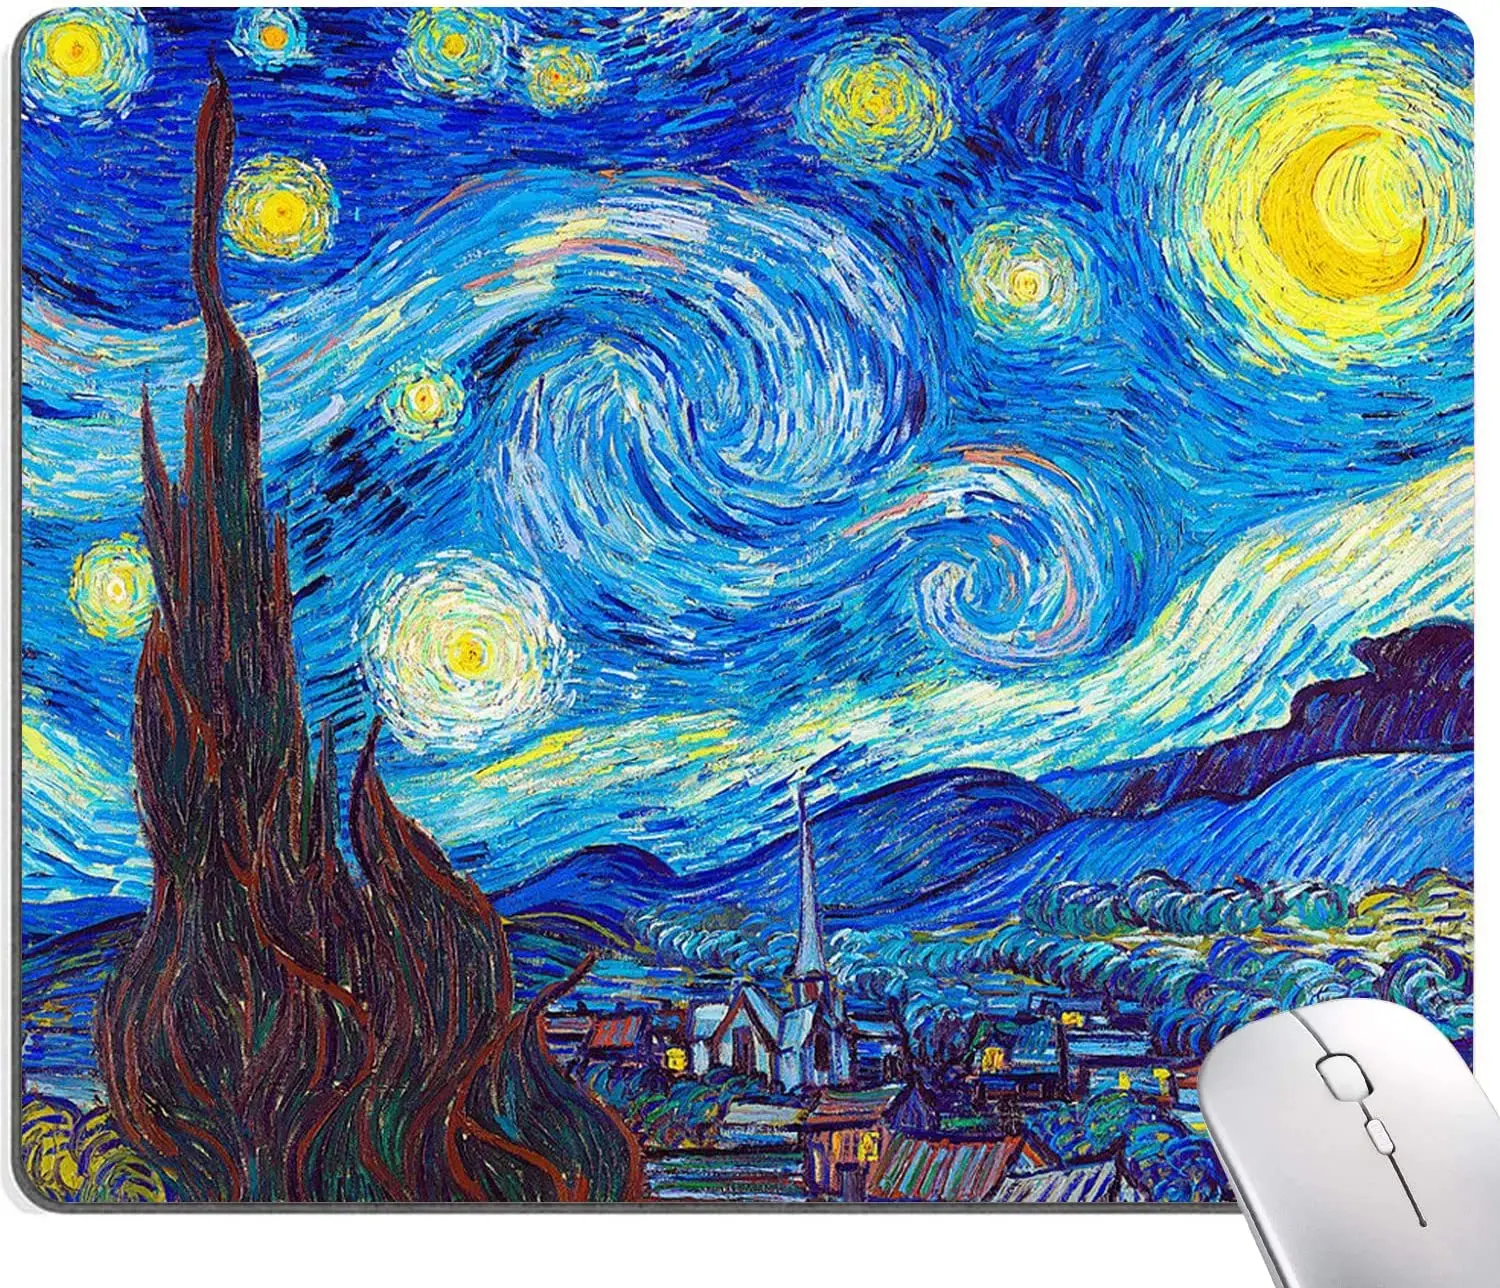 

Mouse Pad Van Gogh Starry Sky Oil Painting Mouse Pad Square Mouse Mat Waterproof Mousepad Non-Slip Rubber Base Mouse Pads